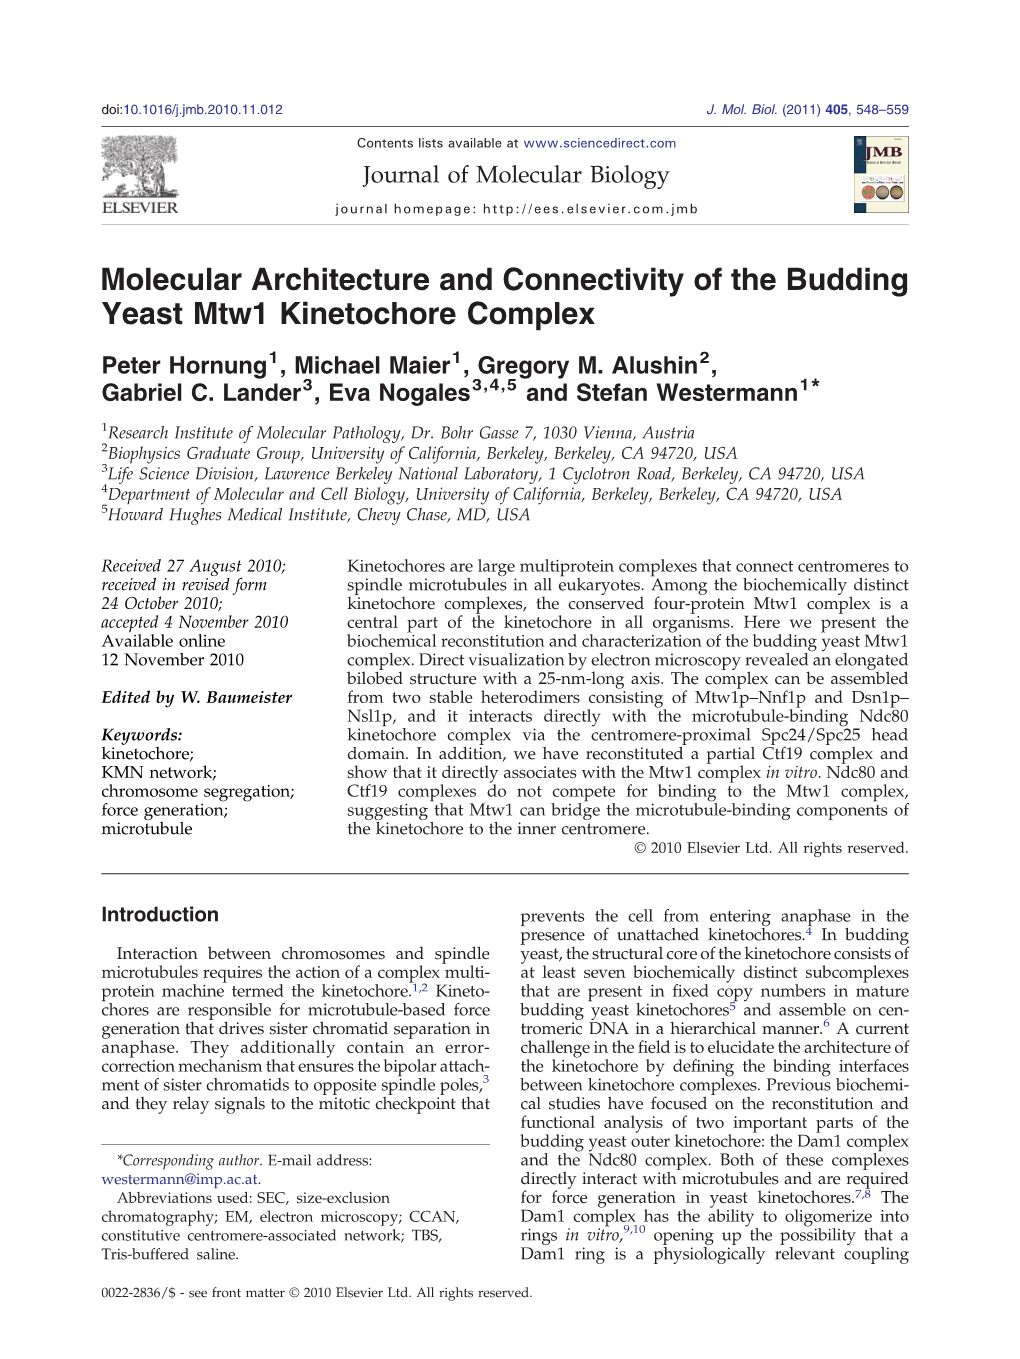 Molecular Architecture and Connectivity of the Budding Yeast Mtw1 Kinetochore Complex